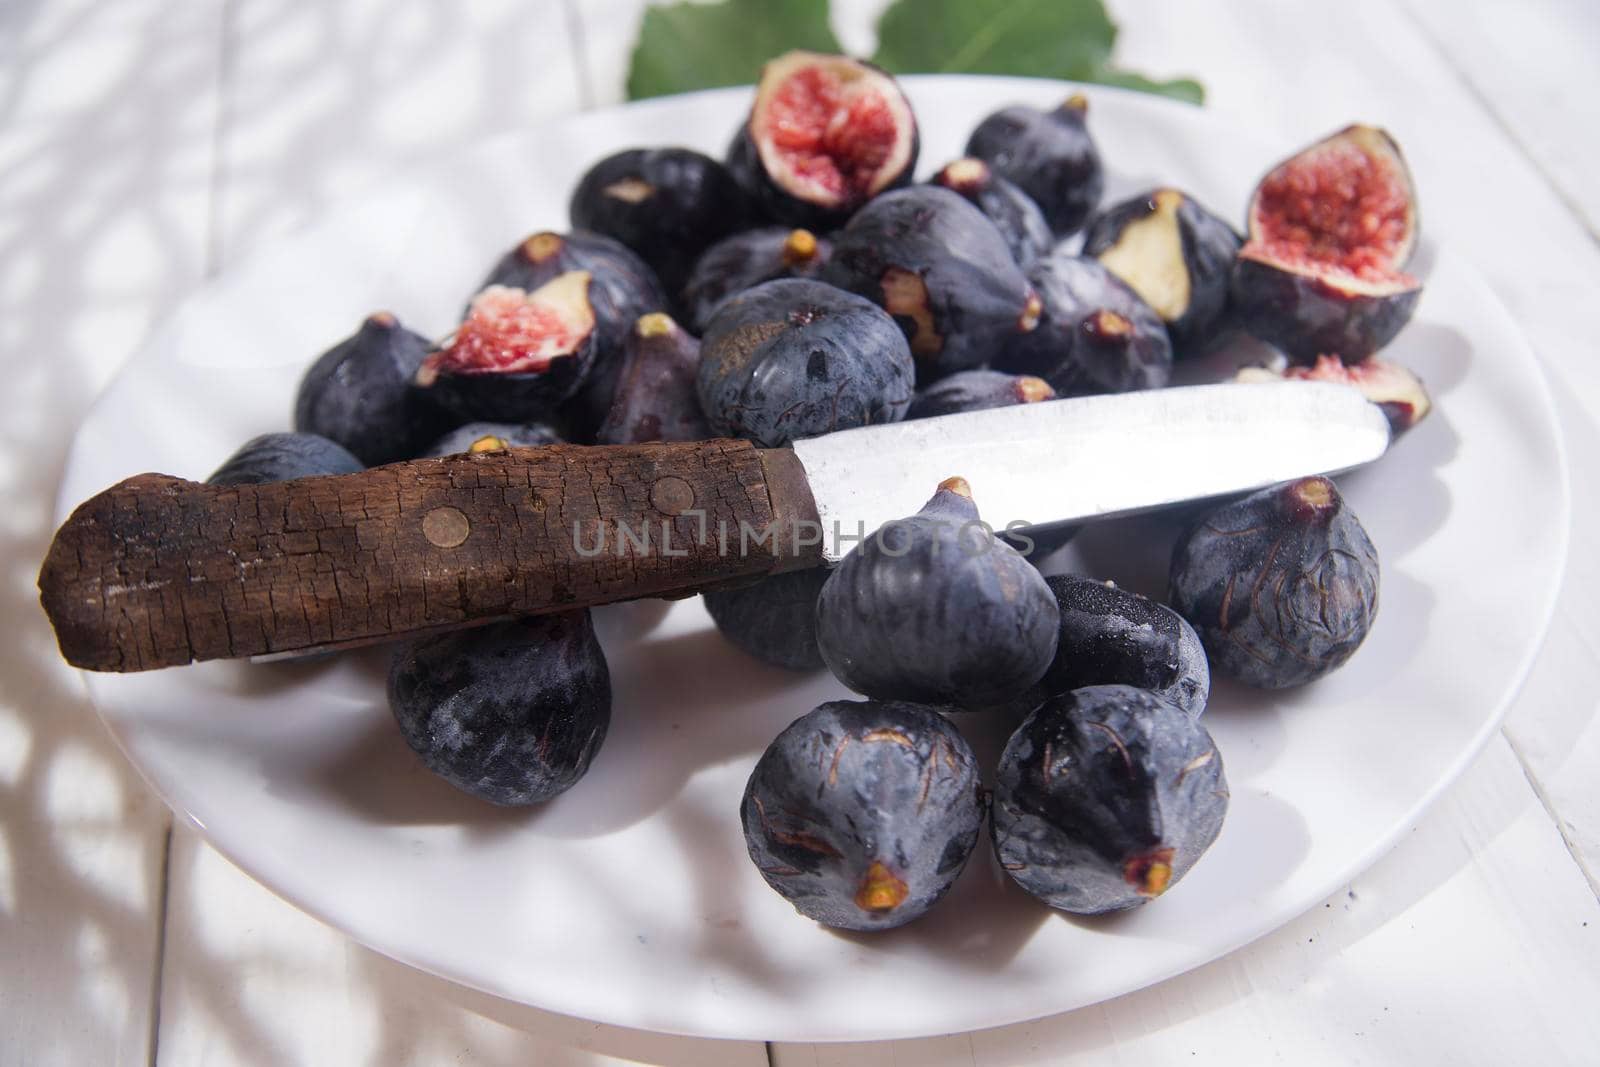 Presentation of collection of figs blacks, typical summer fruit